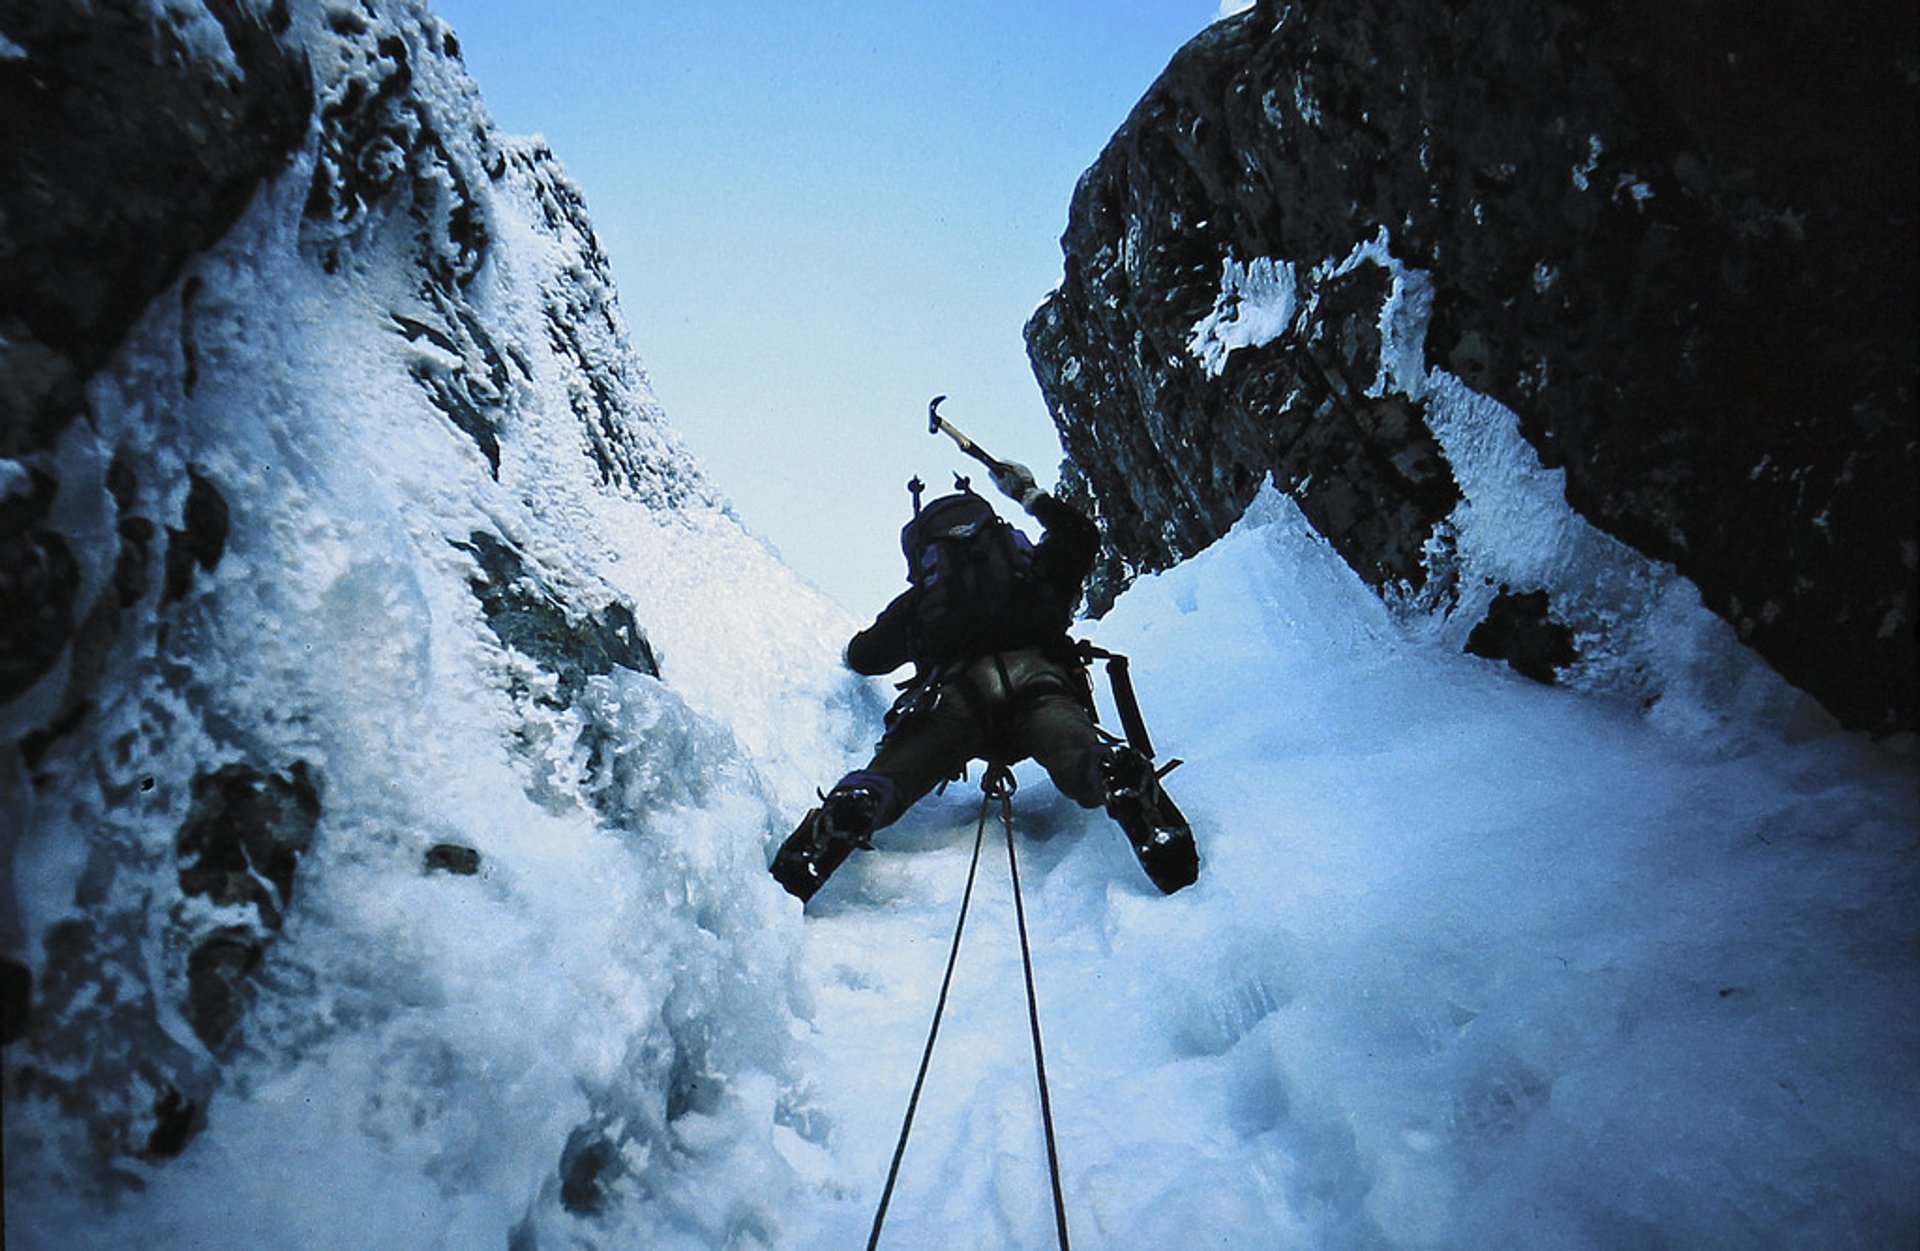 Winter Mountaineering and Ice Climbing